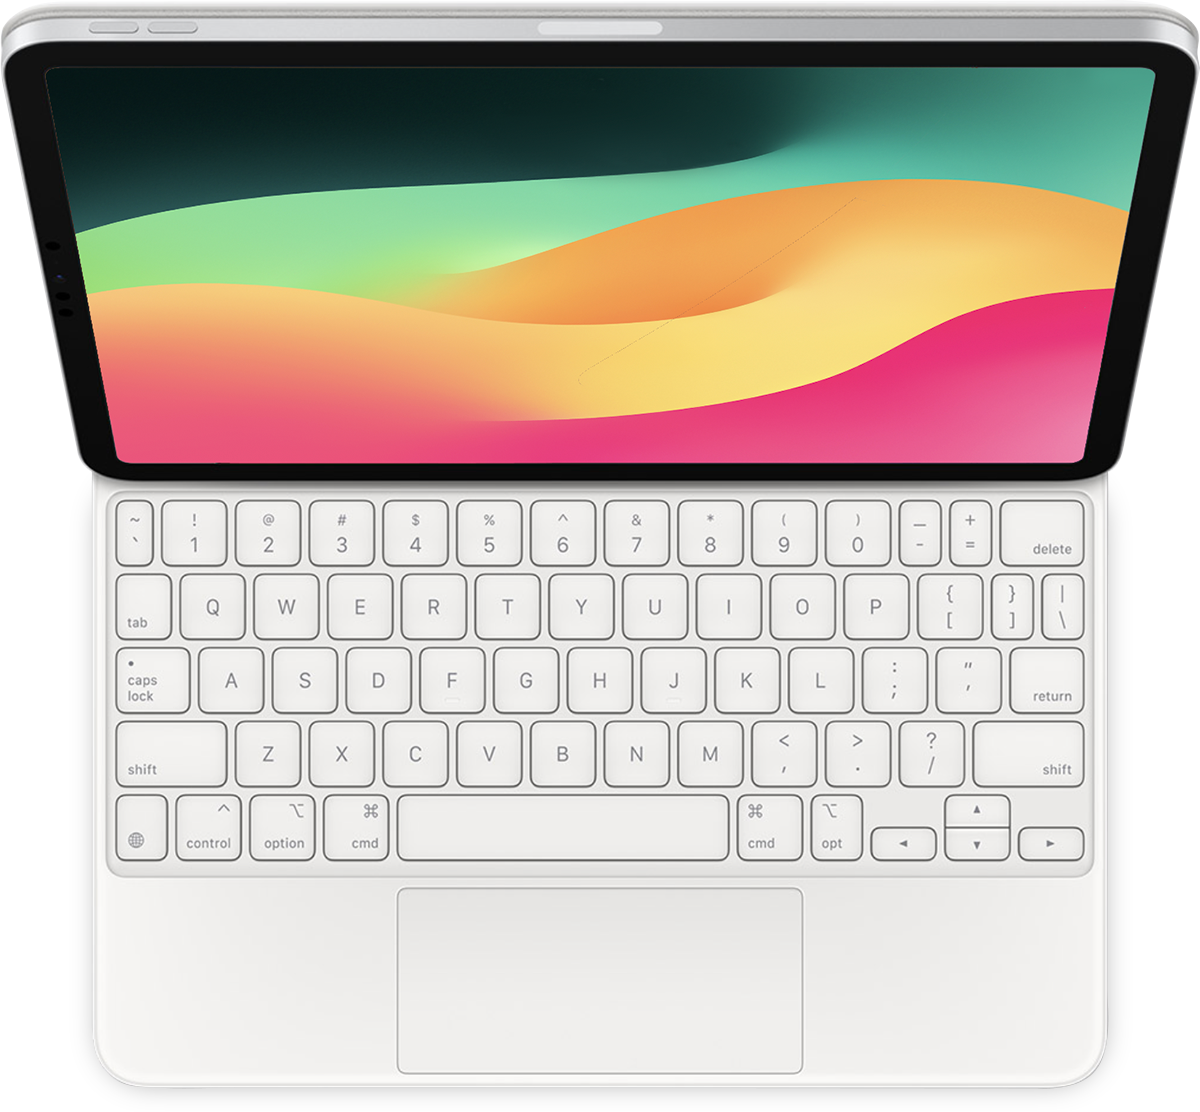 Set up and use Magic Keyboard for iPad - Apple Support (CA)